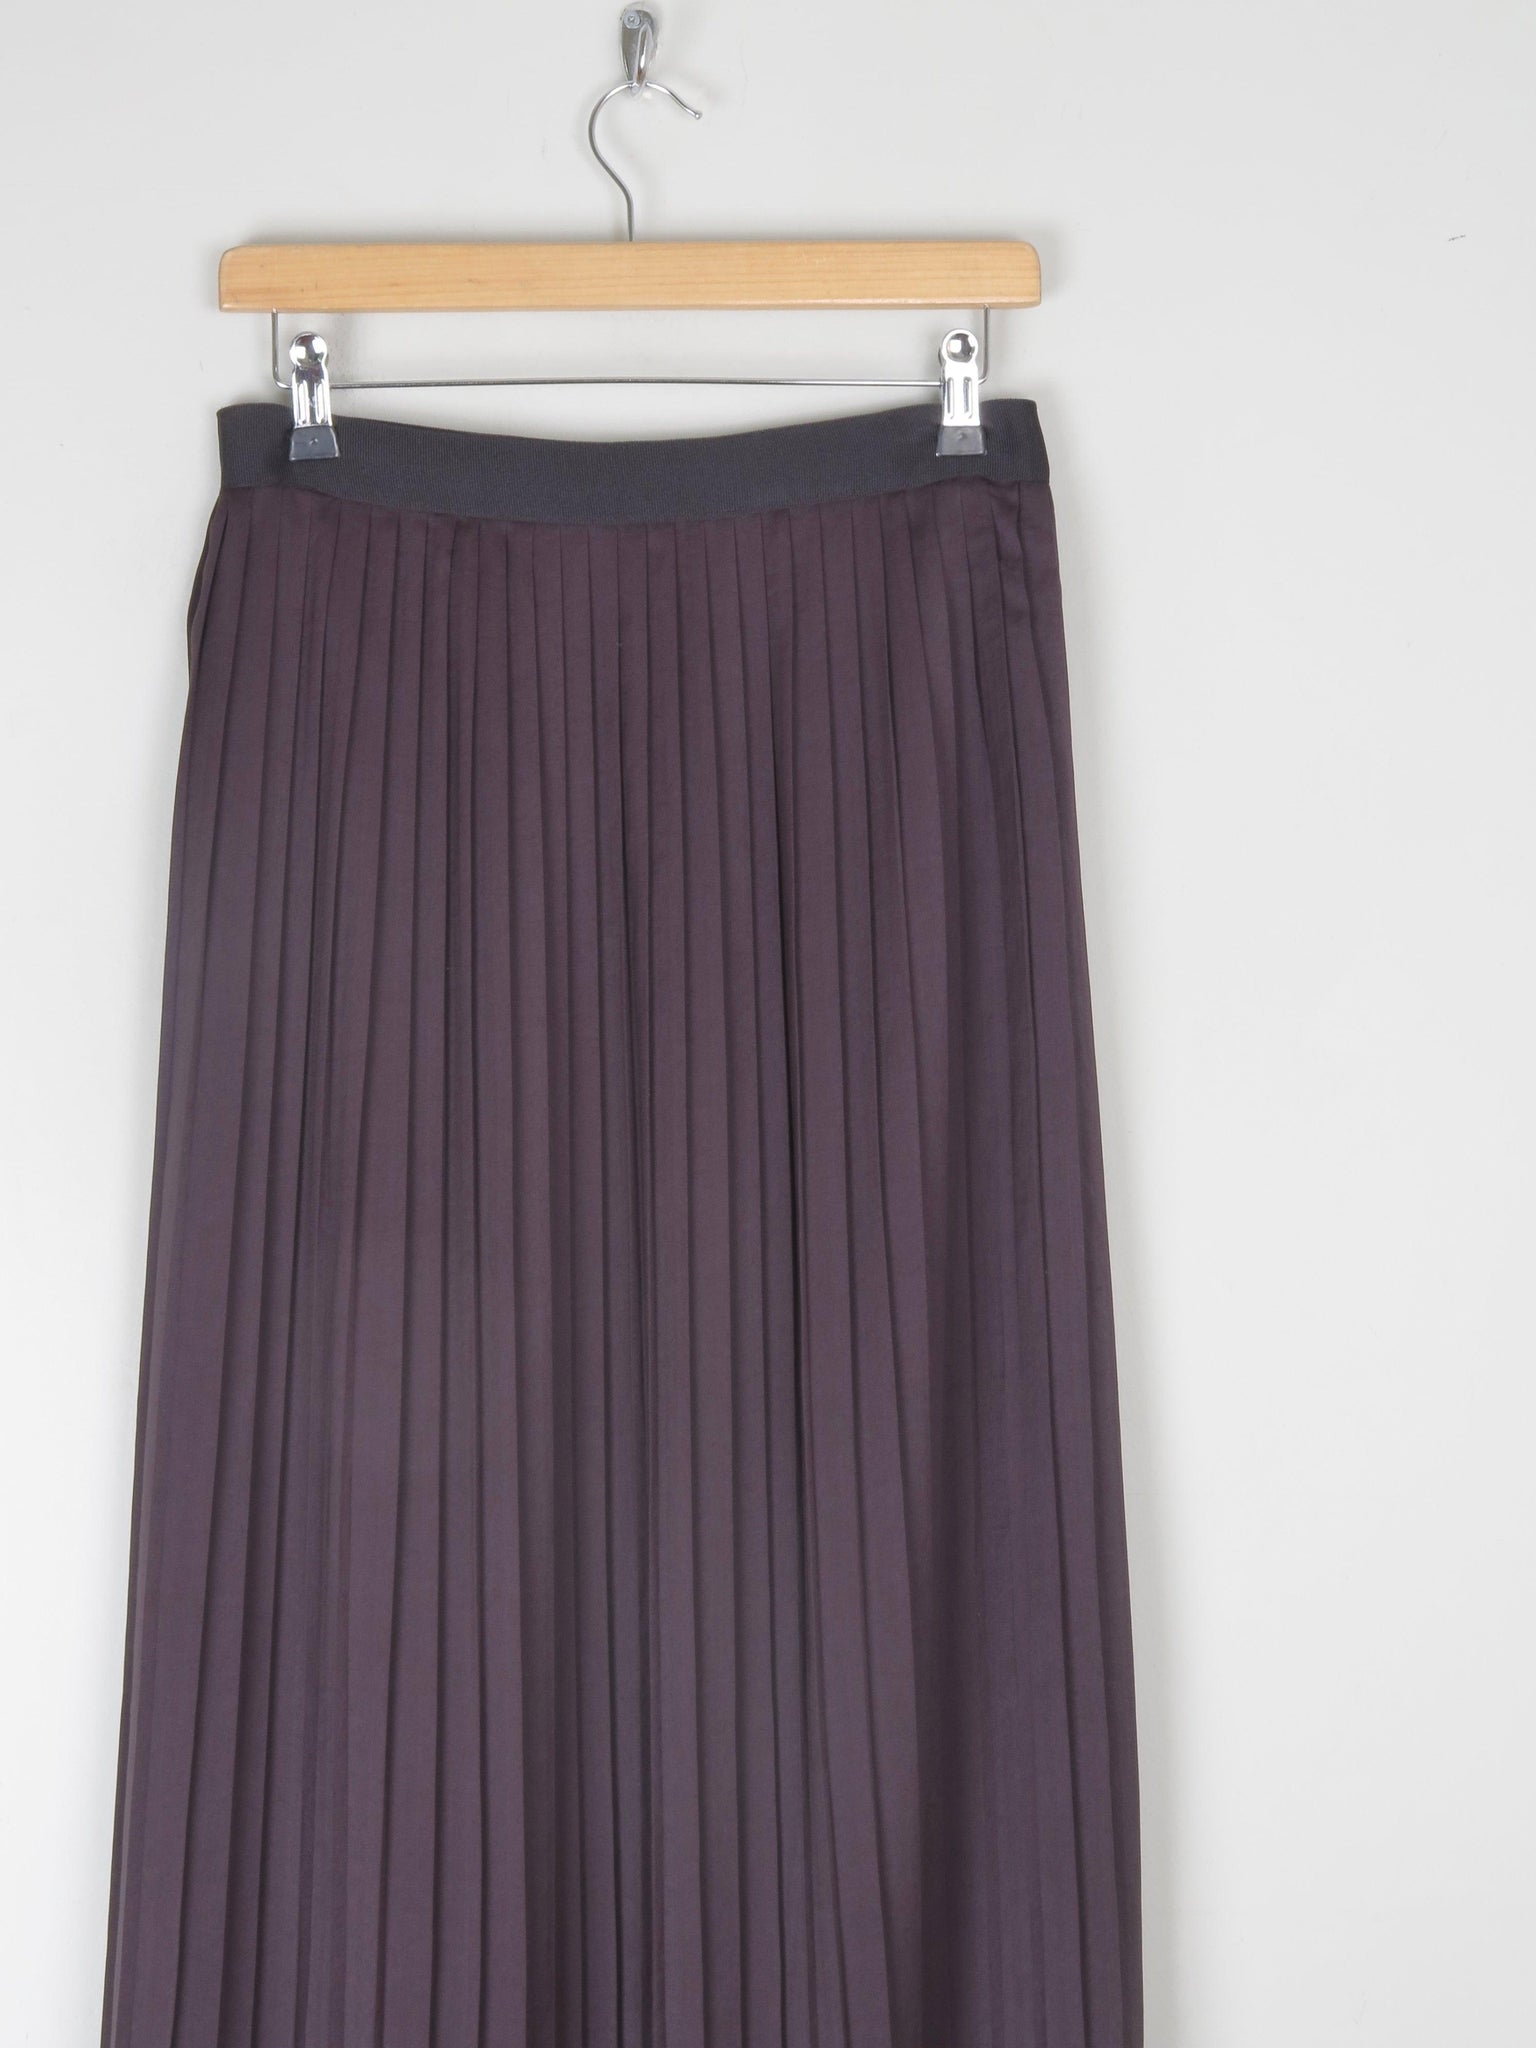 Ink Black Armani Exchange Pleated Maxi Skirt 29" S - The Harlequin